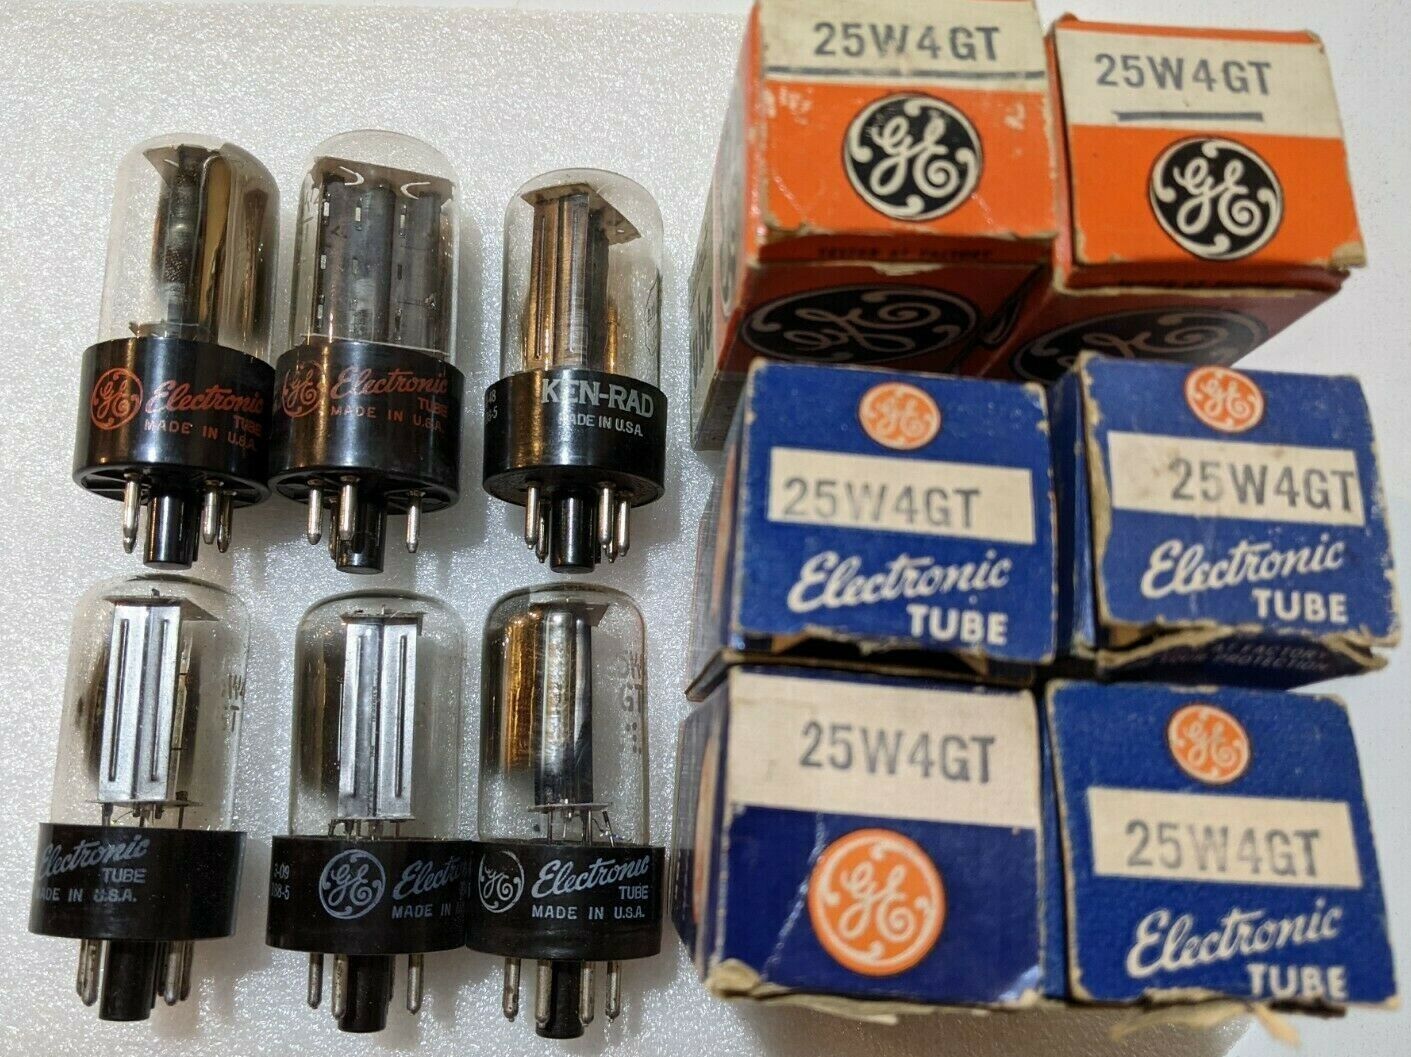 Primary image for 25W4GT Six (6) GE Tubes NOS NIB (1 is GE-Made Ken-Rad)